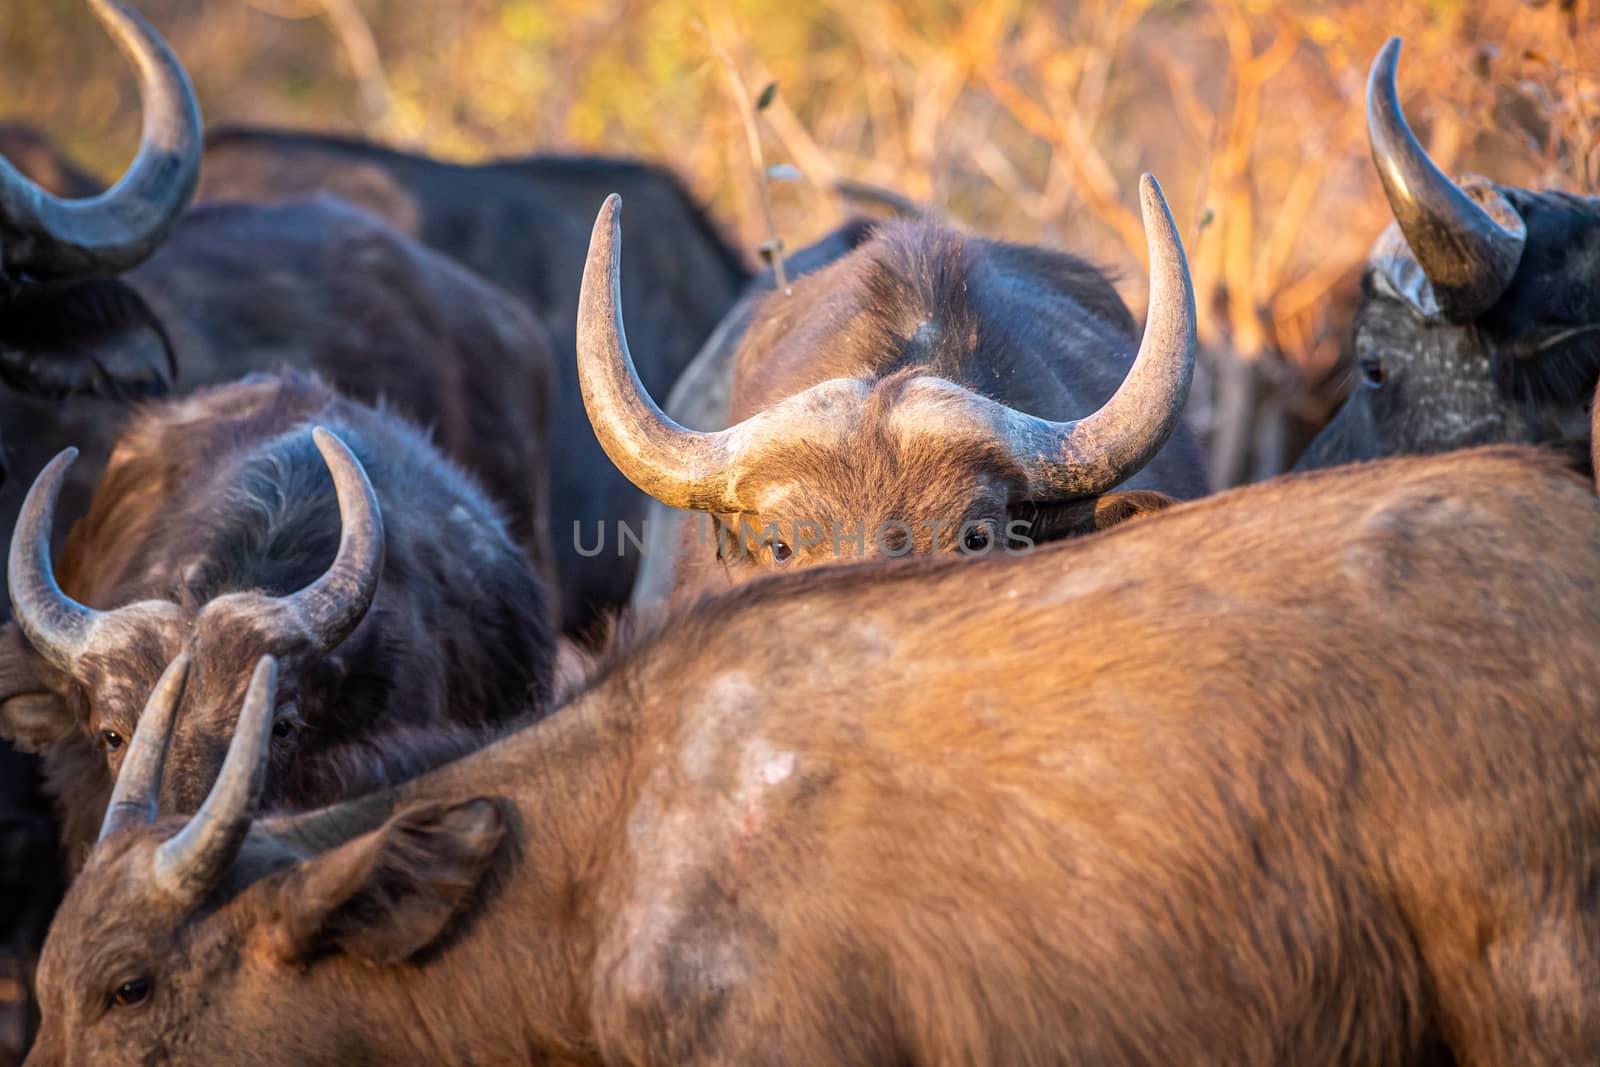 African buffalo hiding behind another buffalo in the Welgevonden game reserve, South Africa.